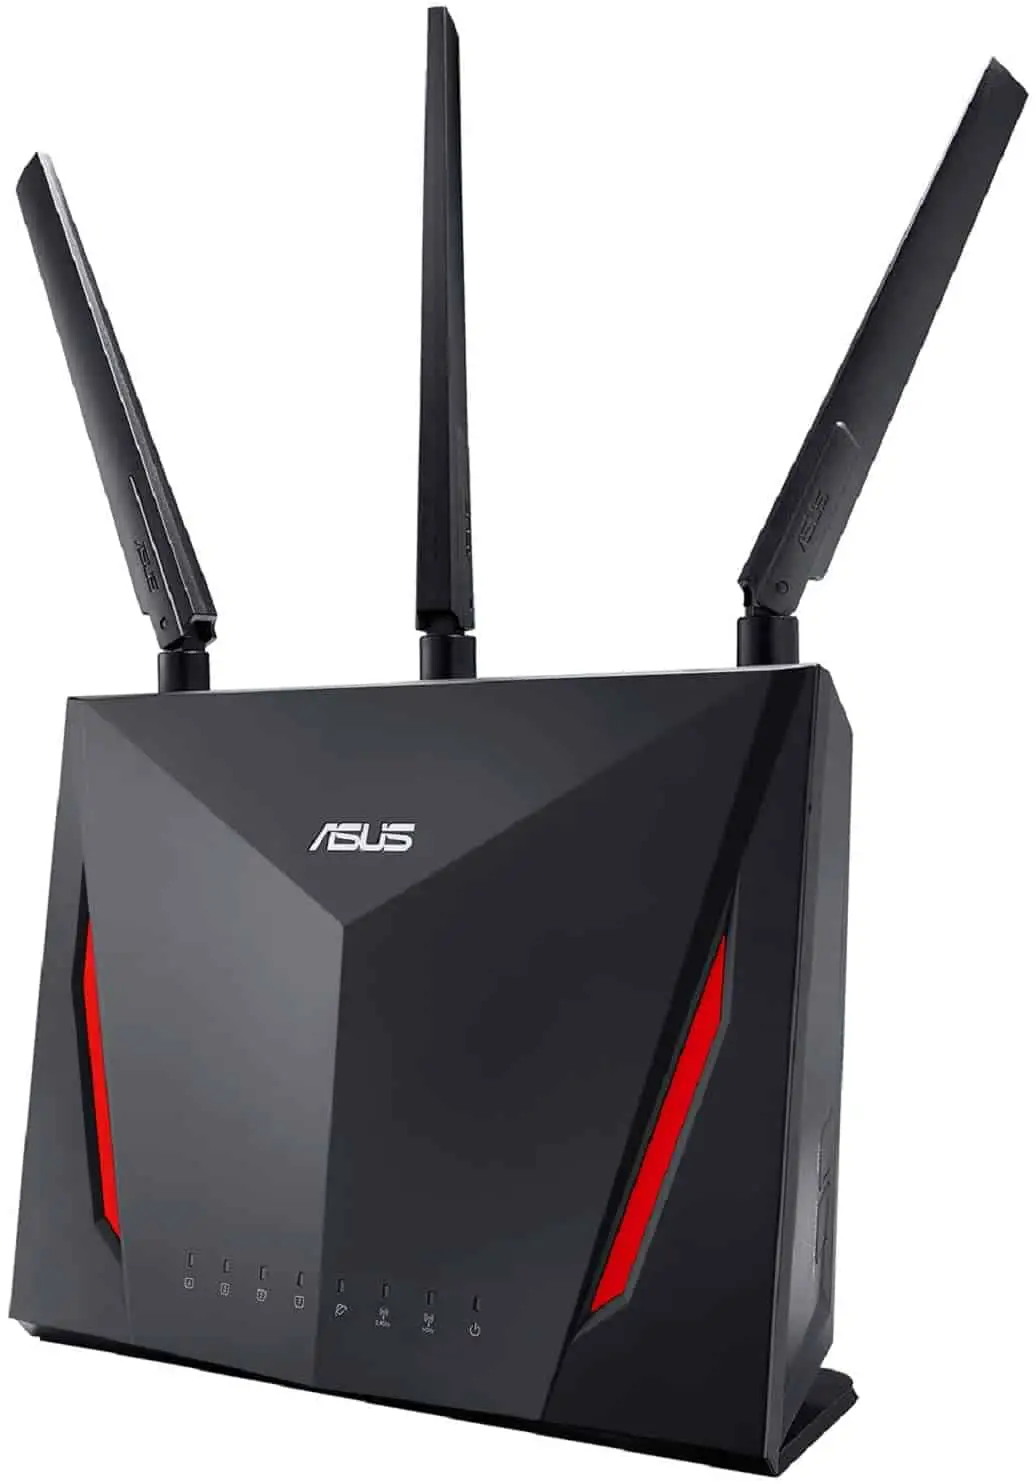 10 Best Asus Routers 2020 reviews